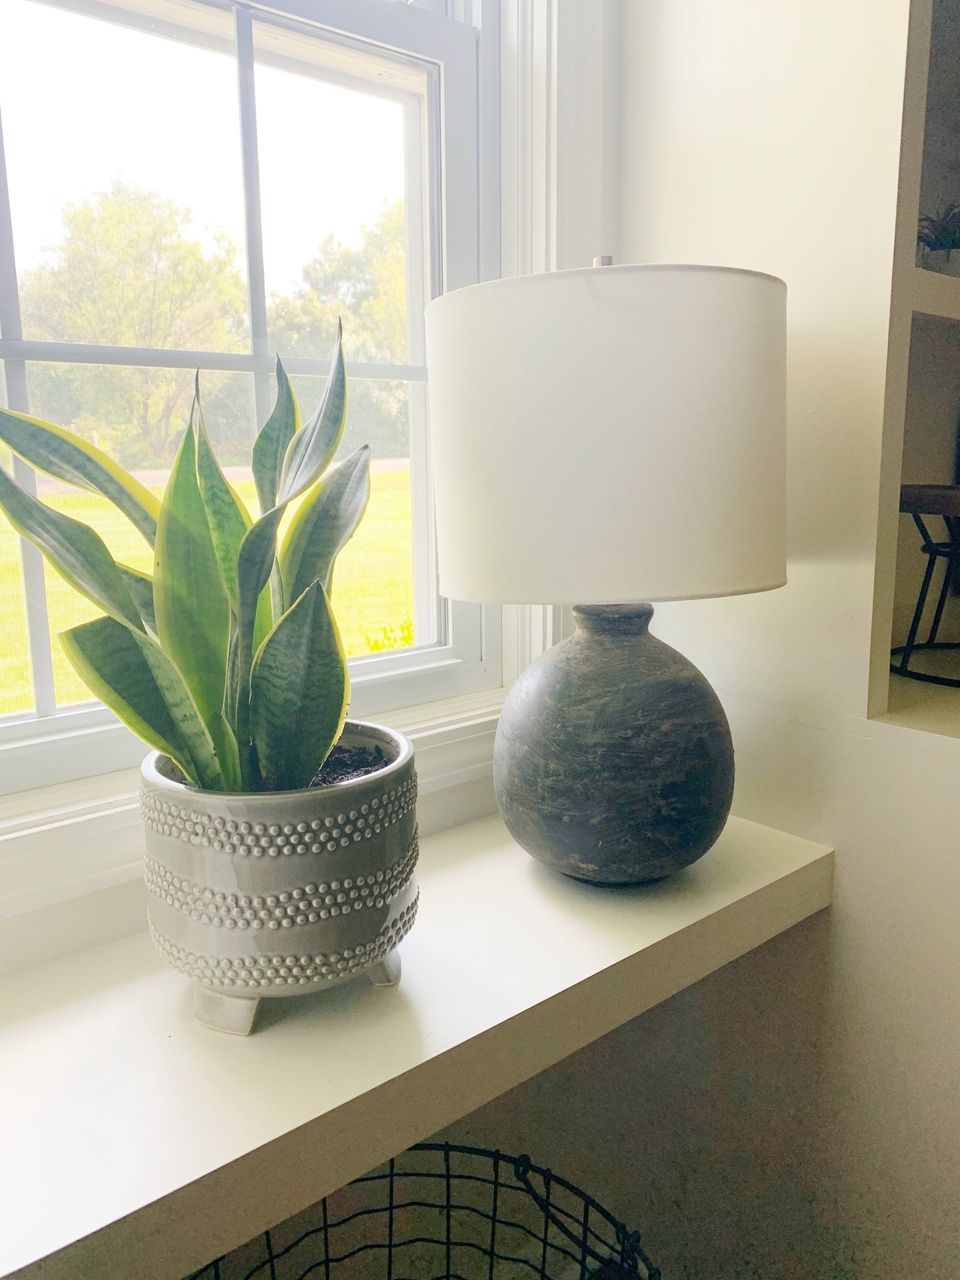 diy rustic pottery lamp made with spray paint and dirt